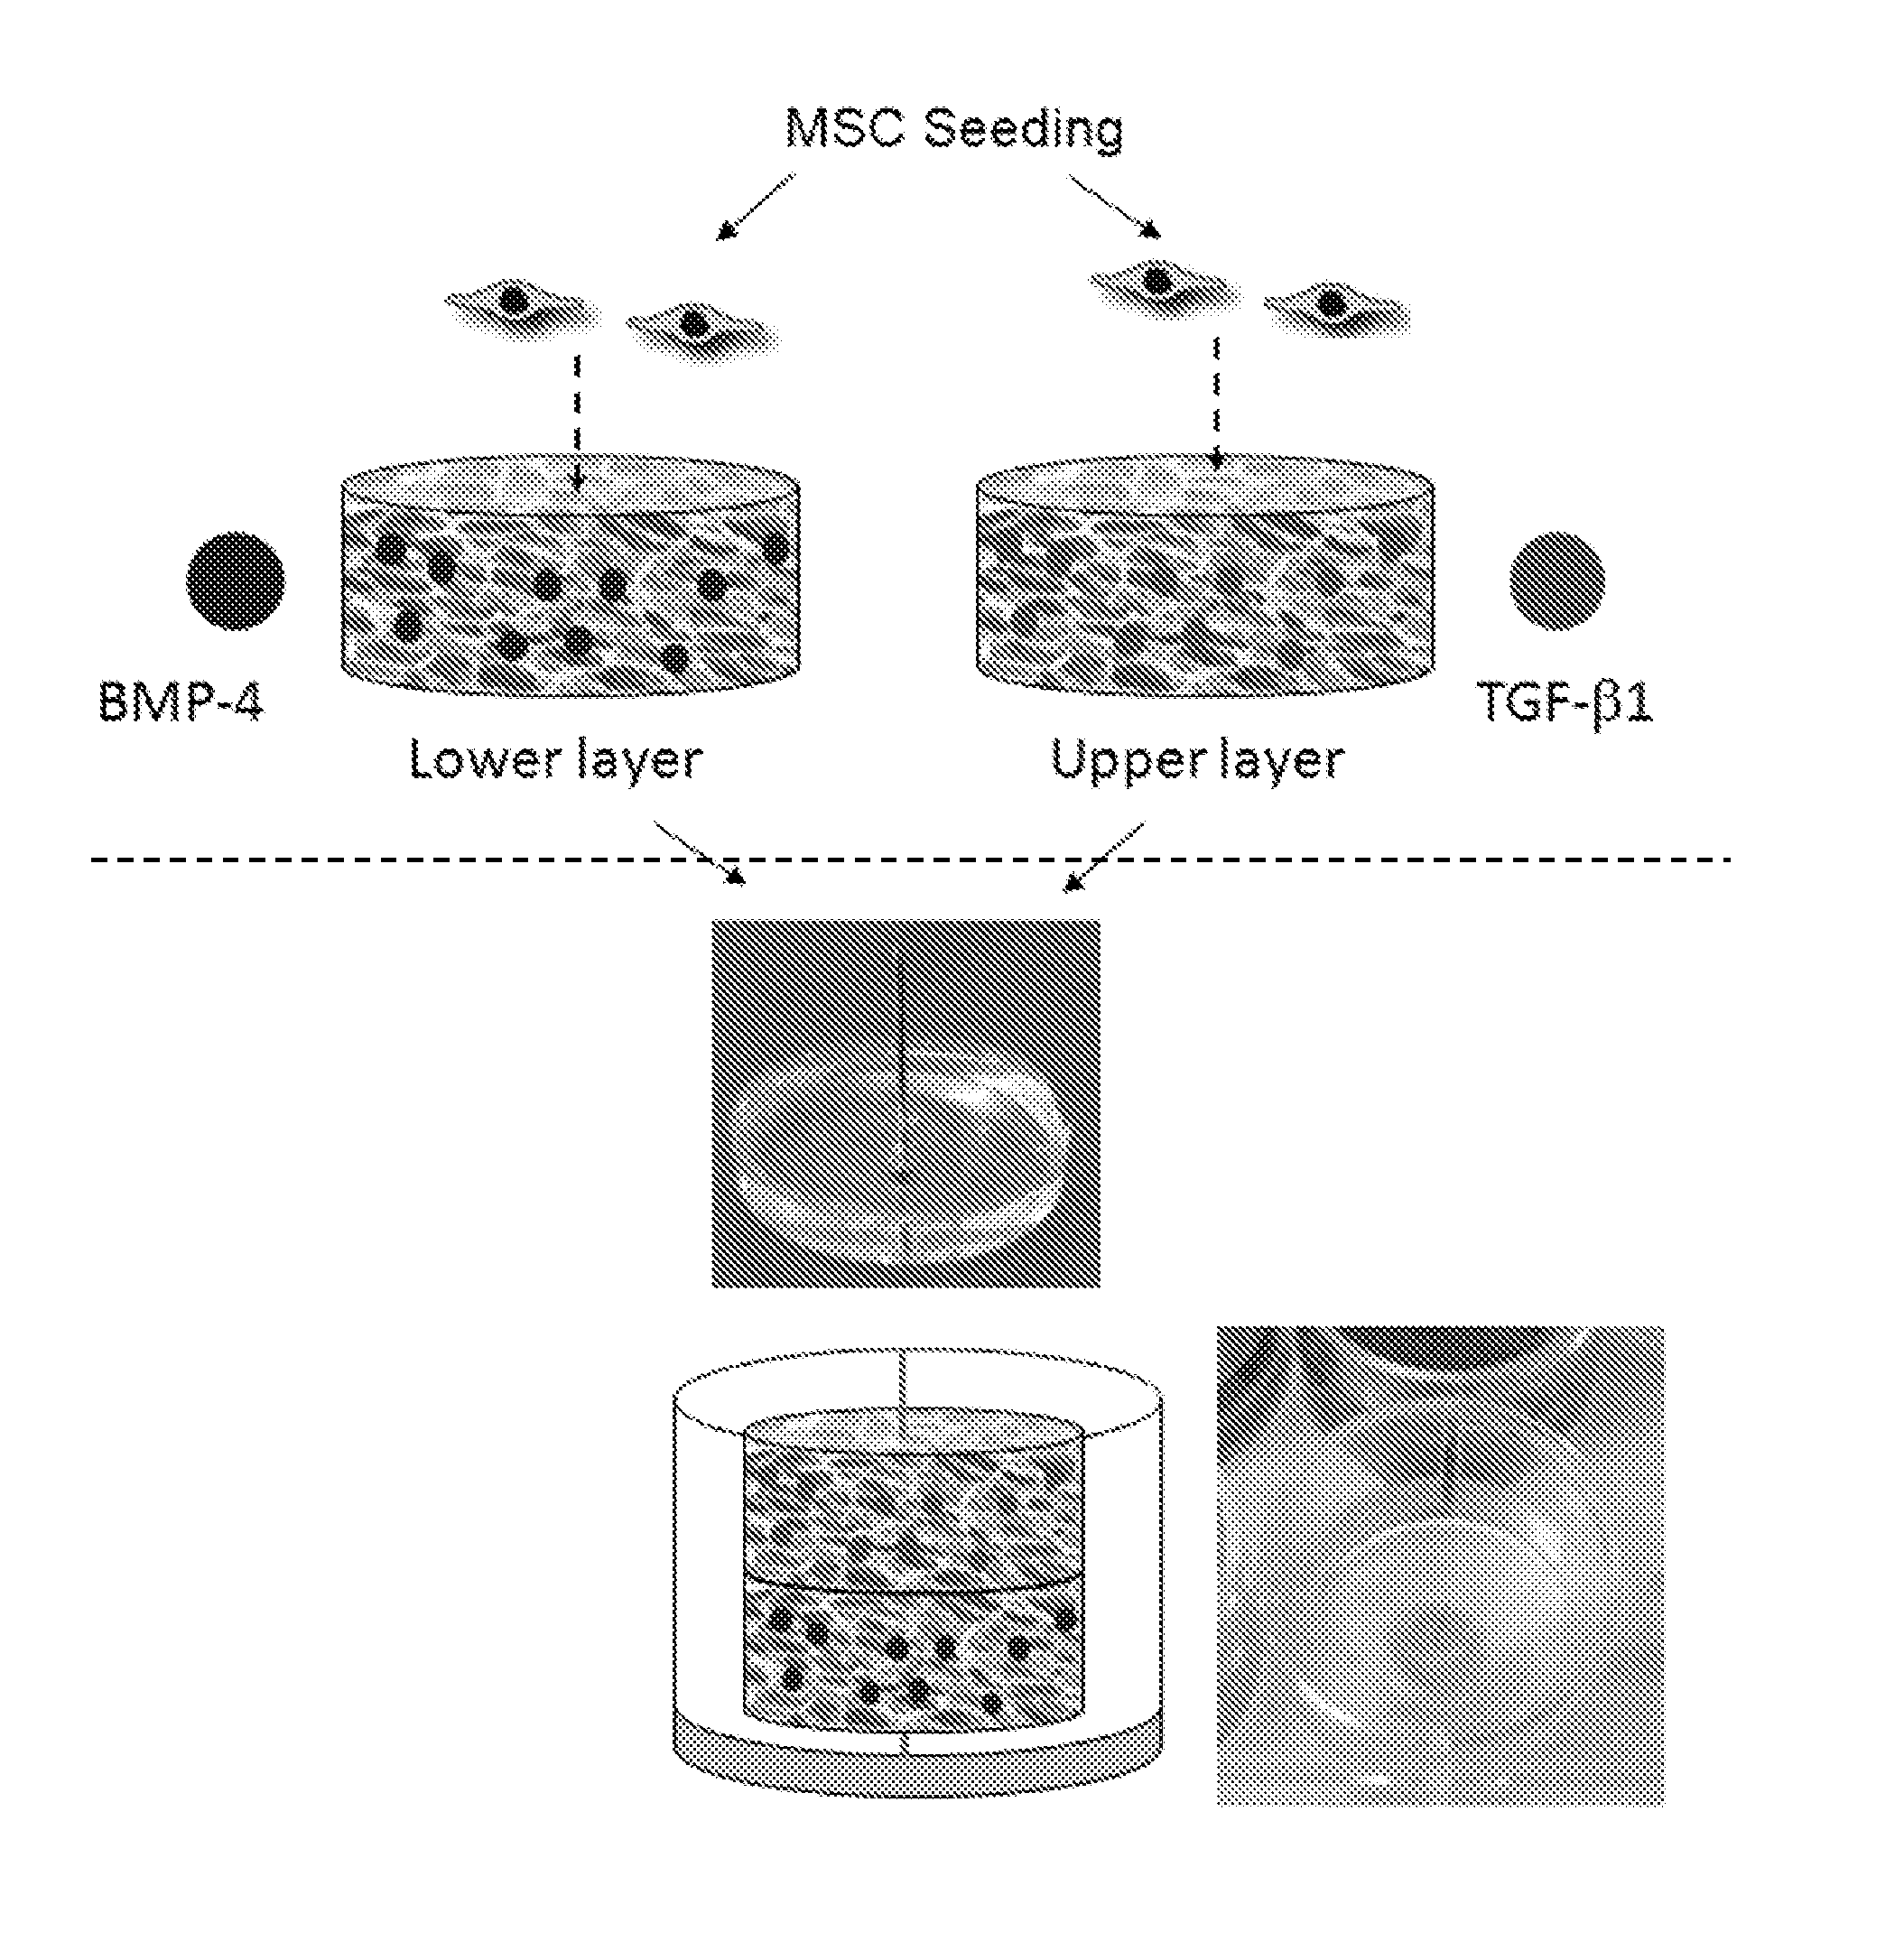 Hydrogel system comprising spatially separated bioactive polypeptides